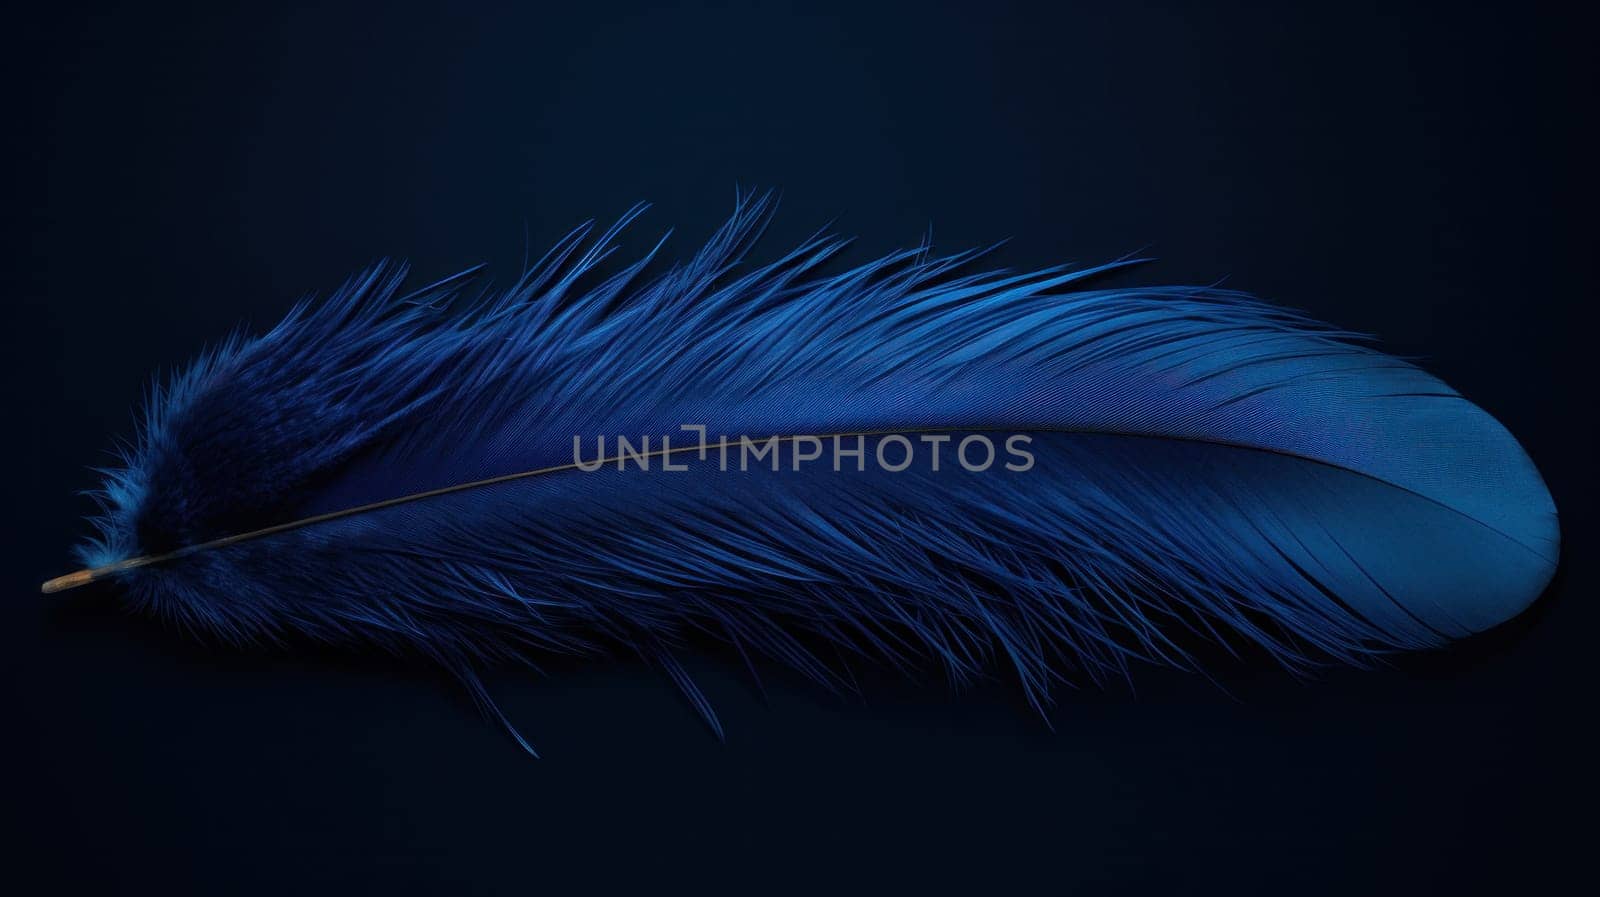 A blue feather laying on a black background with no other objects